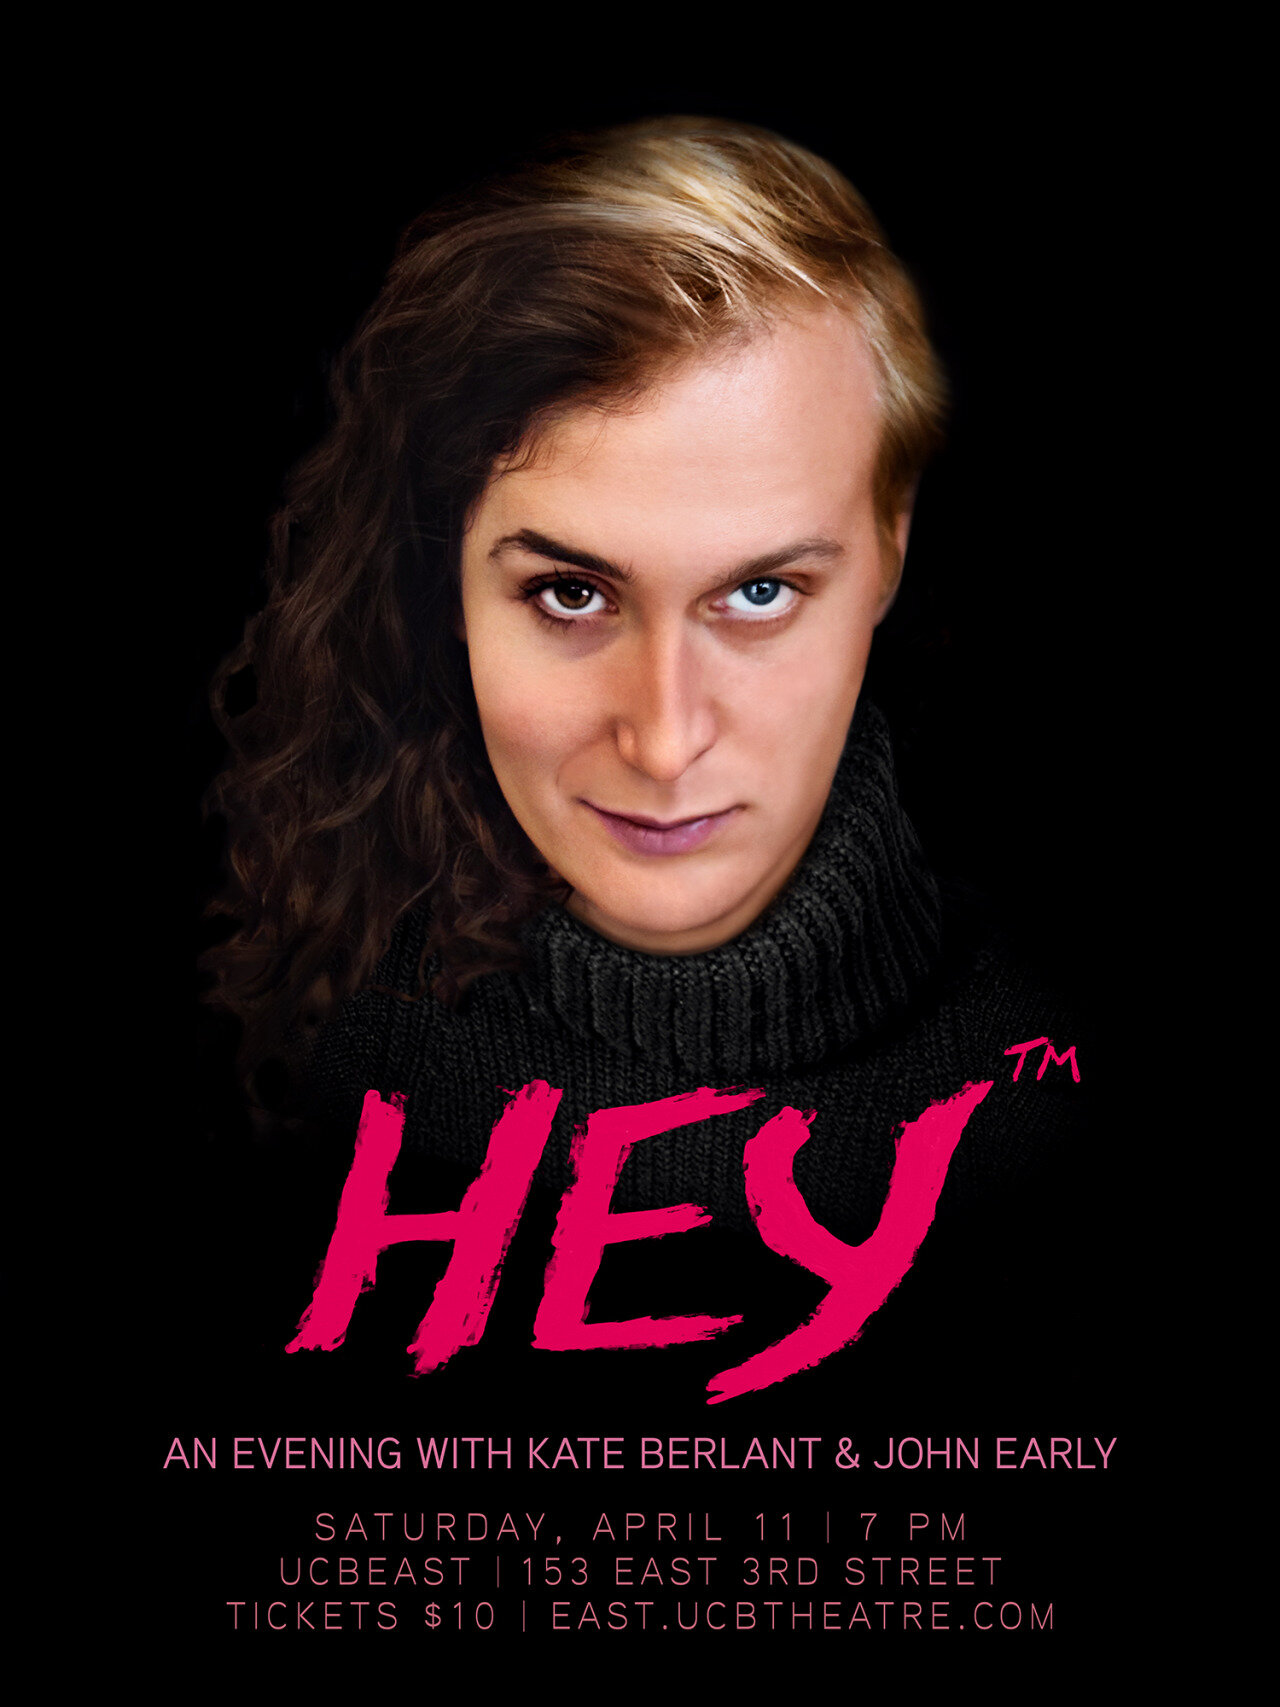 "Hey™" show poster